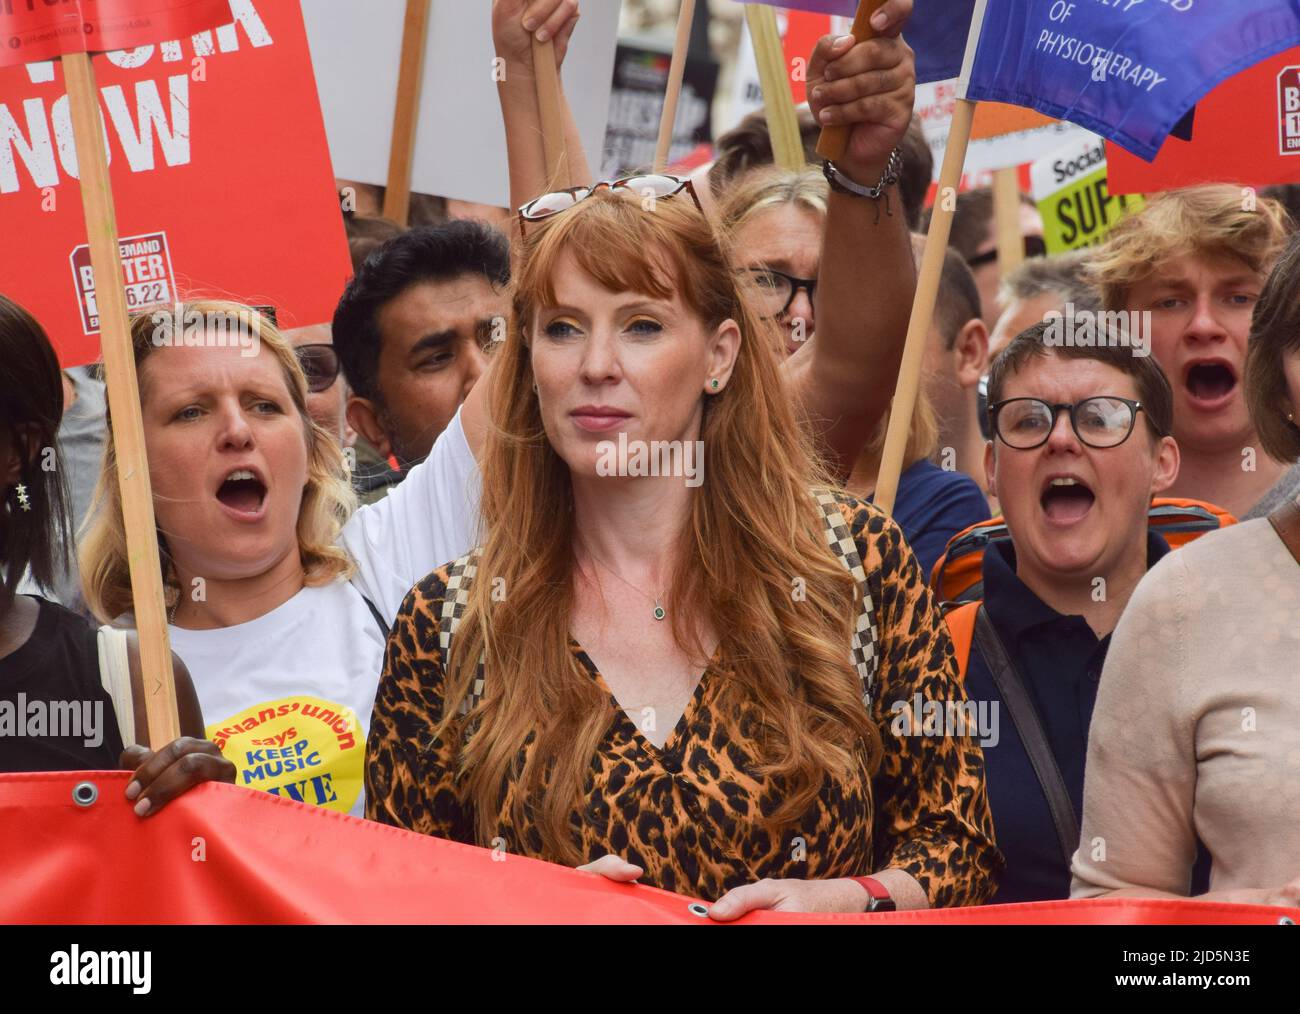 London, UK. 18th June 2022. Labour deputy leader Angela Rayner with protesters in Trafalgar Square. Thousands of people and various trade unions and groups marched through central London in protest against the cost of living crisis, the Tory Government, the Rwanda refugee scheme and other issues. Credit: Vuk Valcic/Alamy Live News Stock Photo